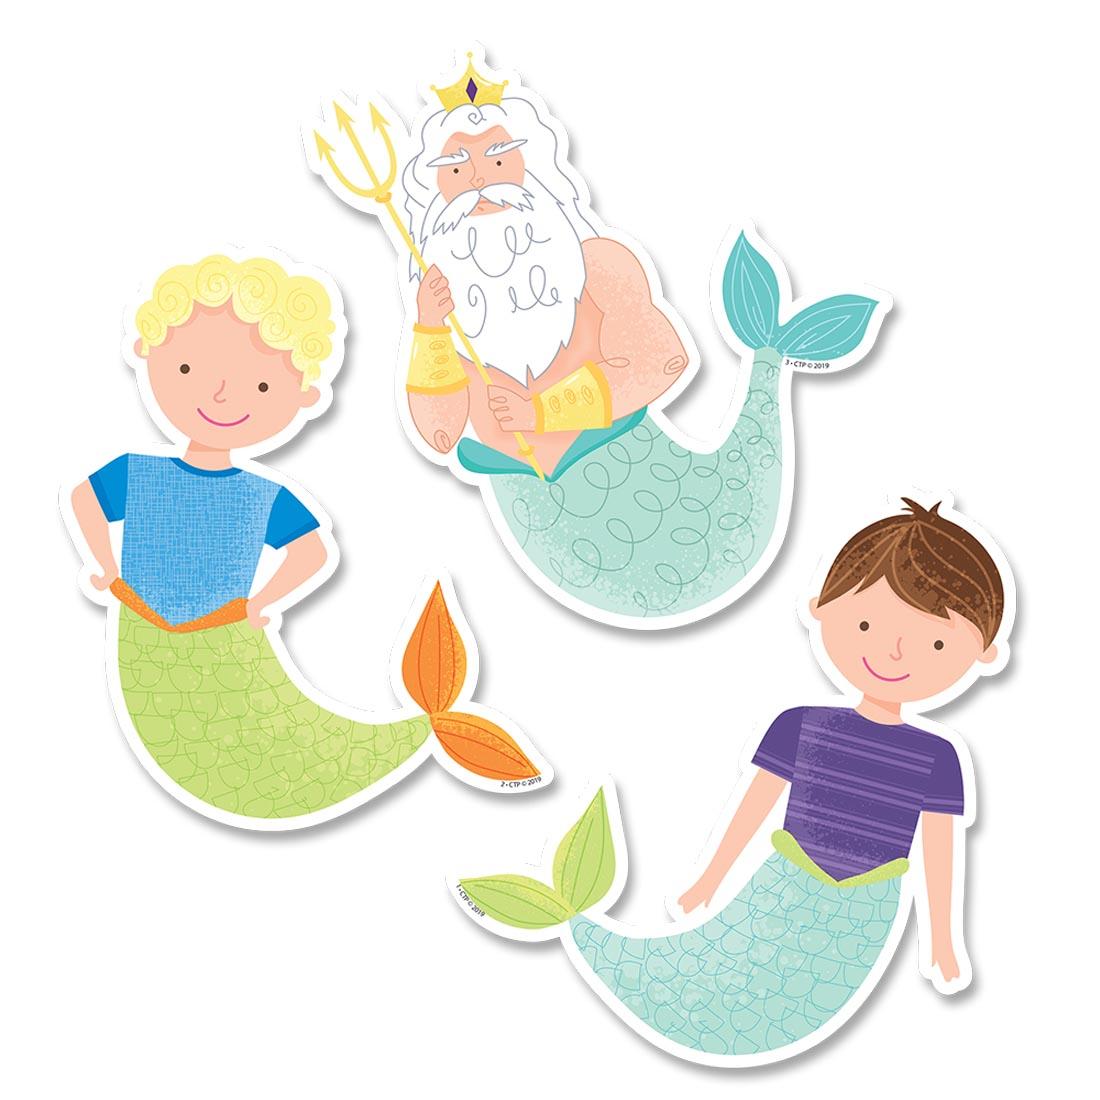 King Neptune and Friends 6" Designer Cut-Outs by Creative Teaching Press